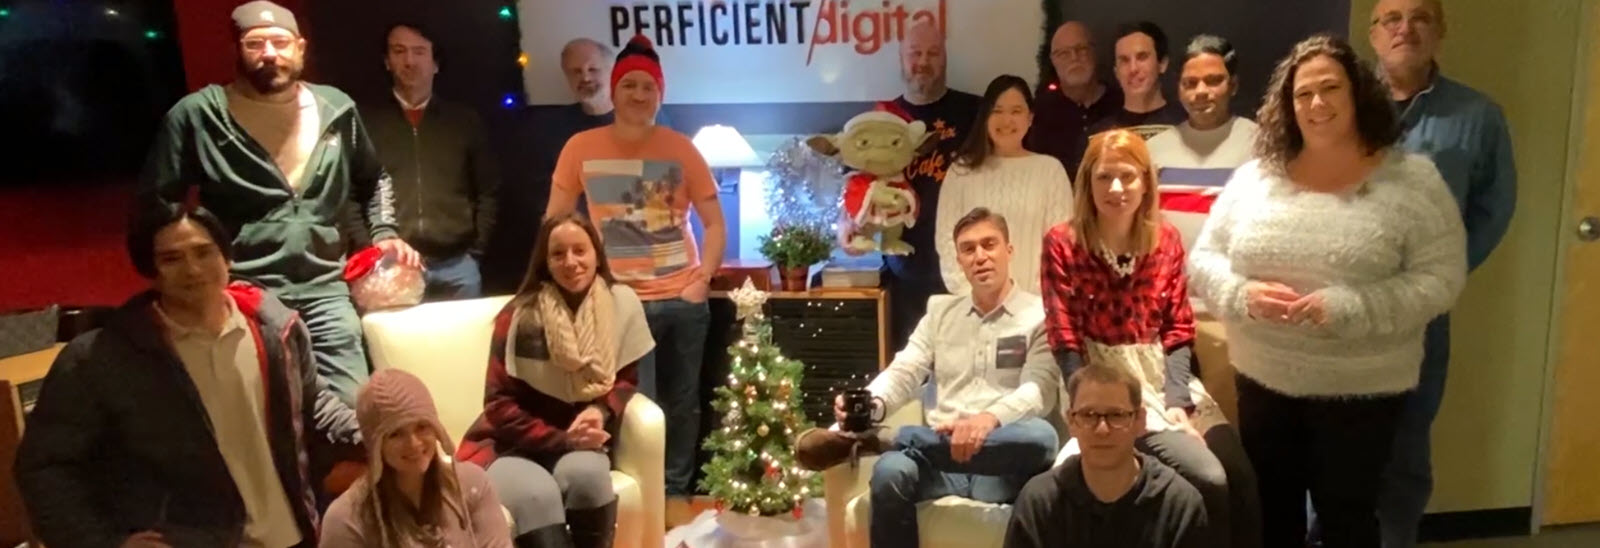 Perficient Holiday Video 2020 Featured Image Cropped